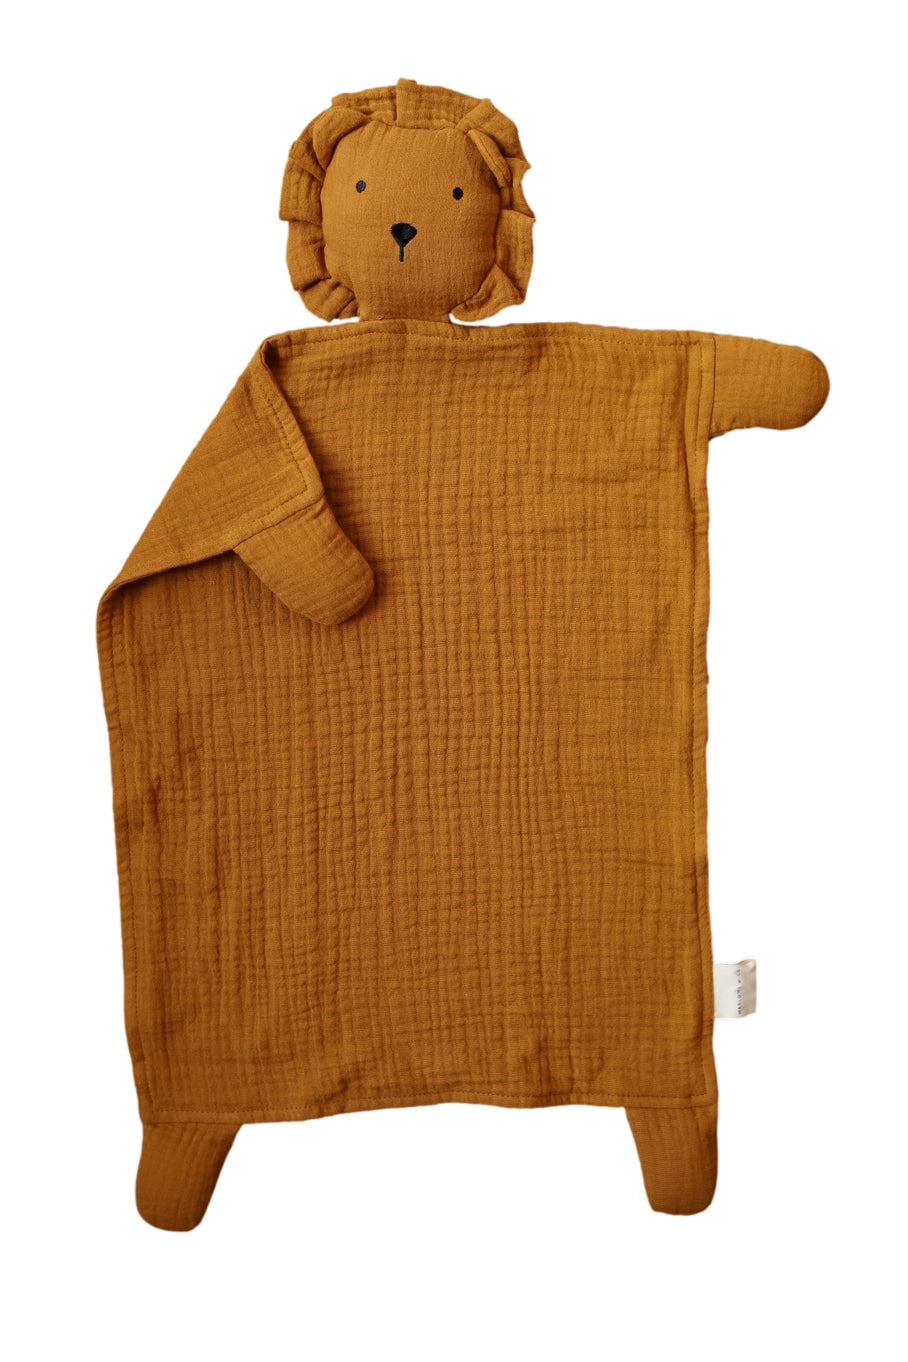 Marlowe & Co - Lion Lovey Blanket in Assorted Colors